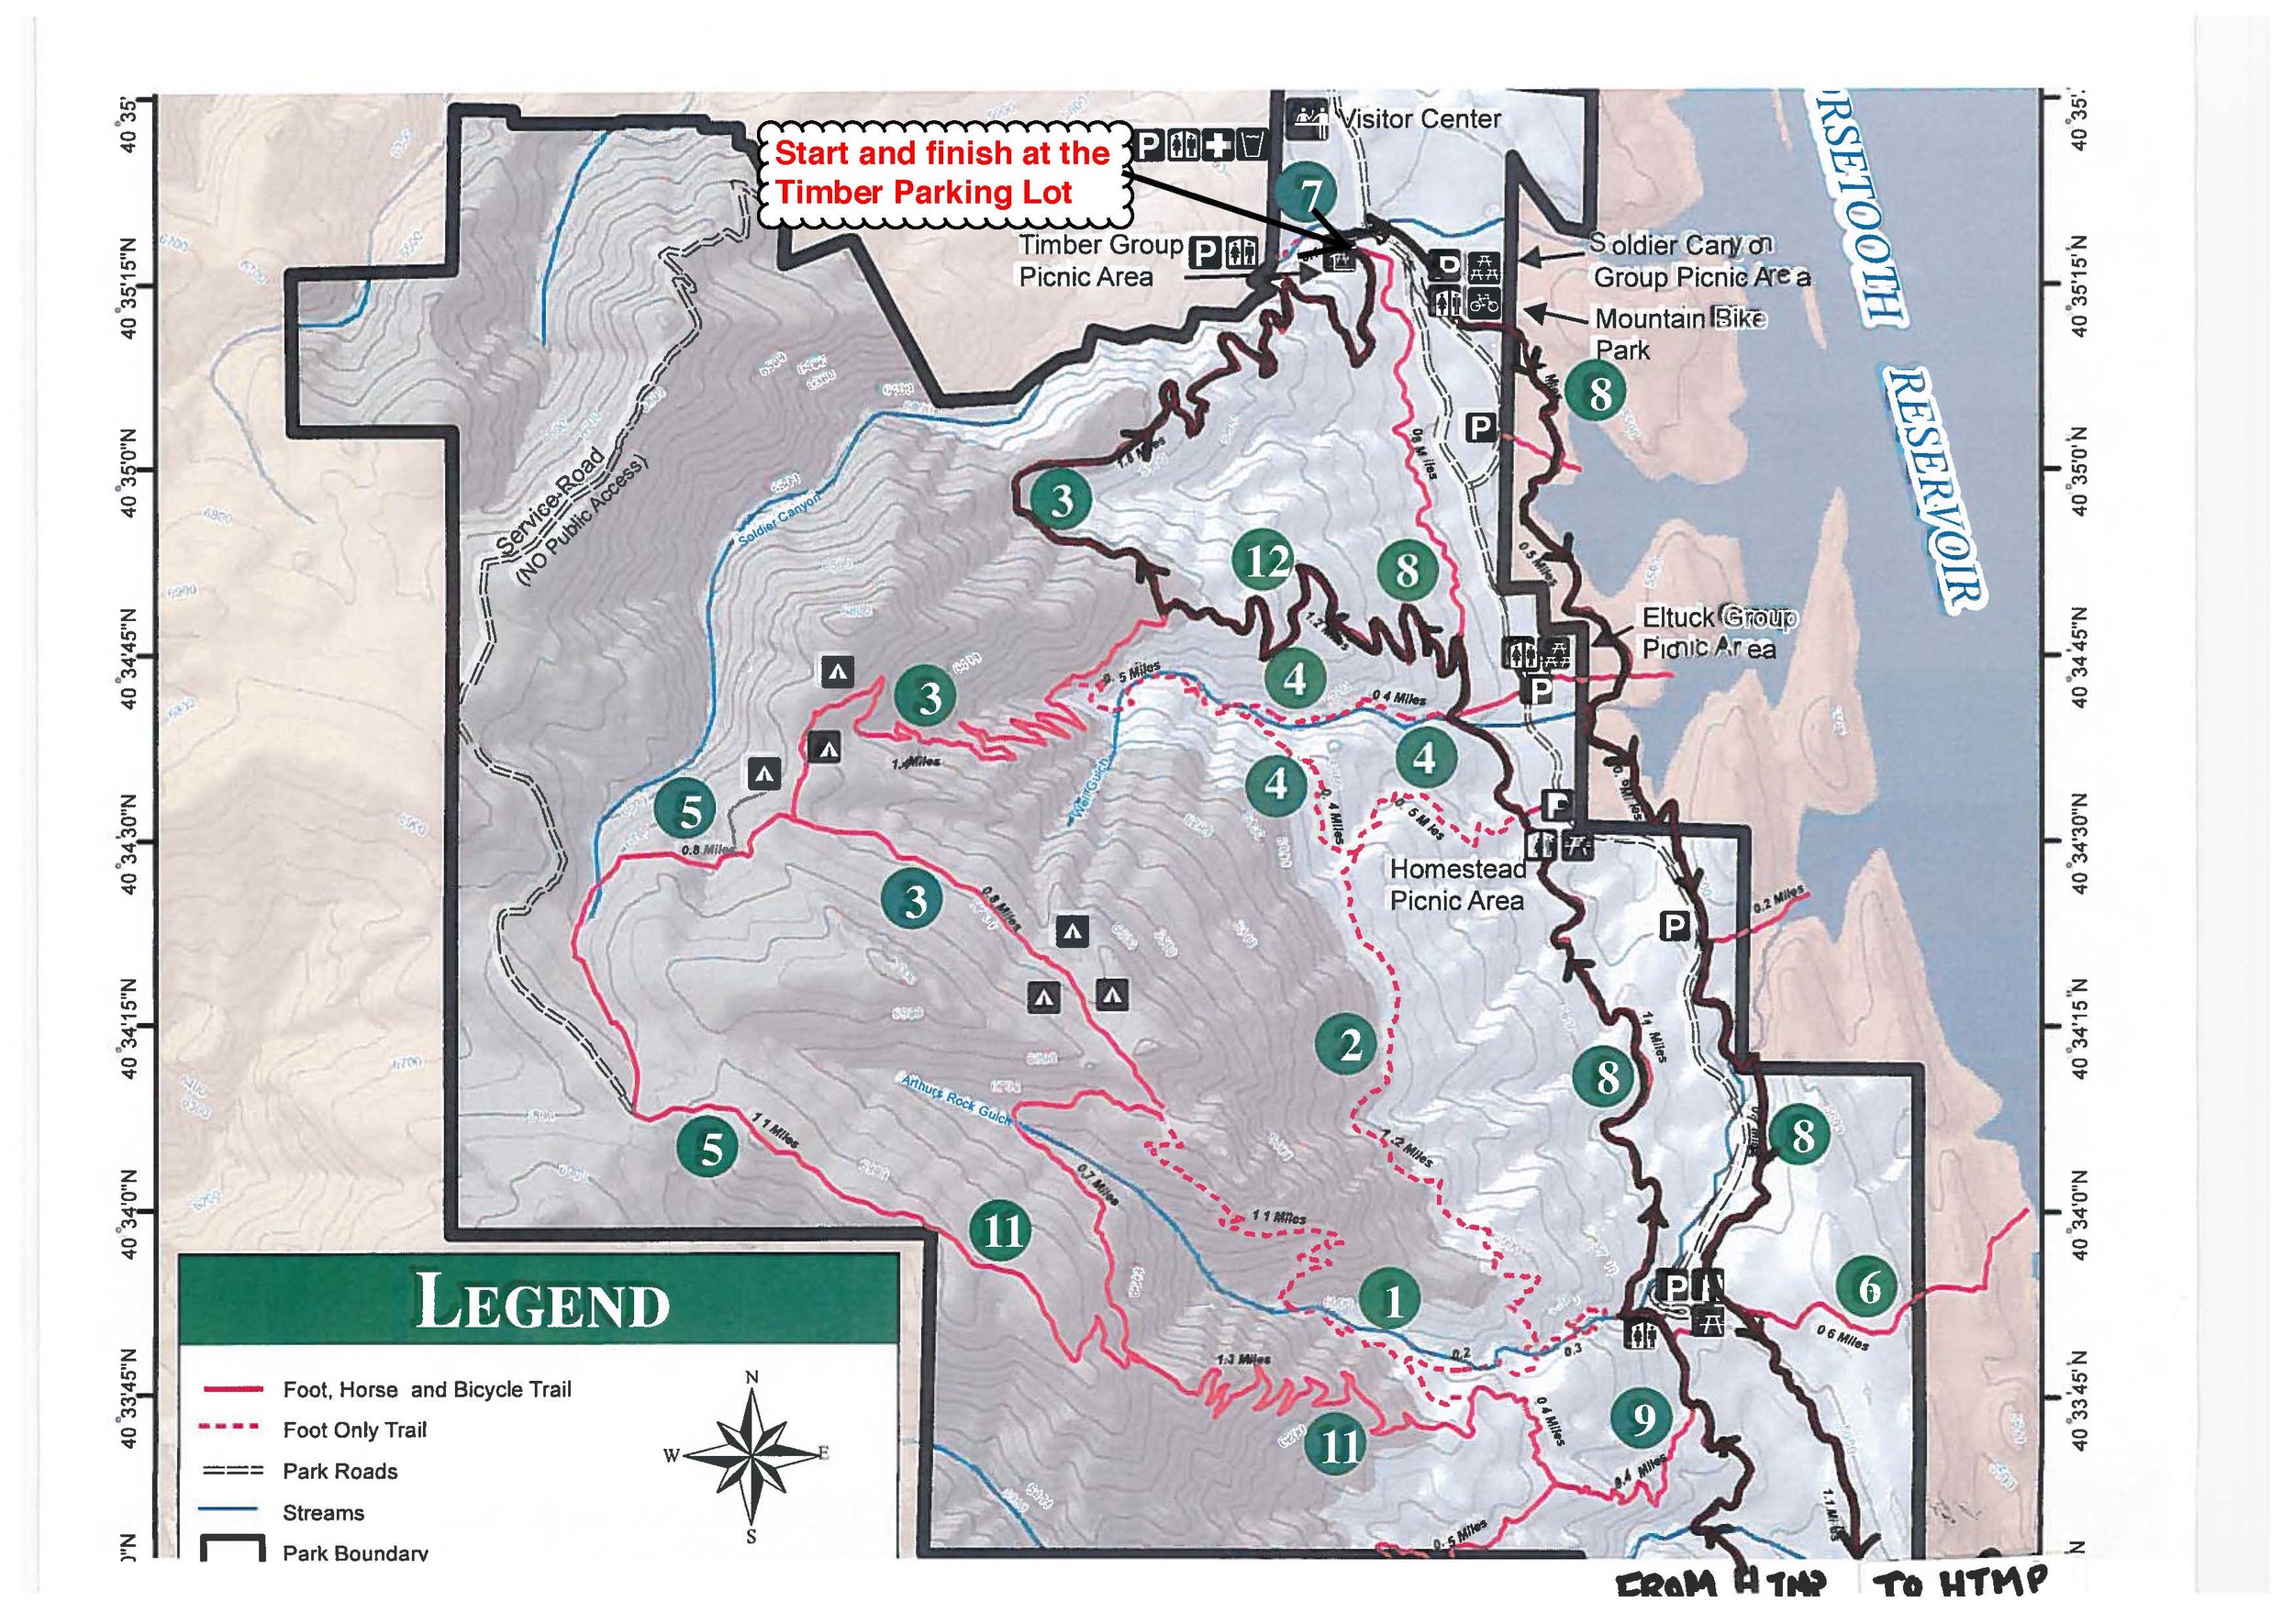 Copy of Map 1 - Lory State Park (north bit)